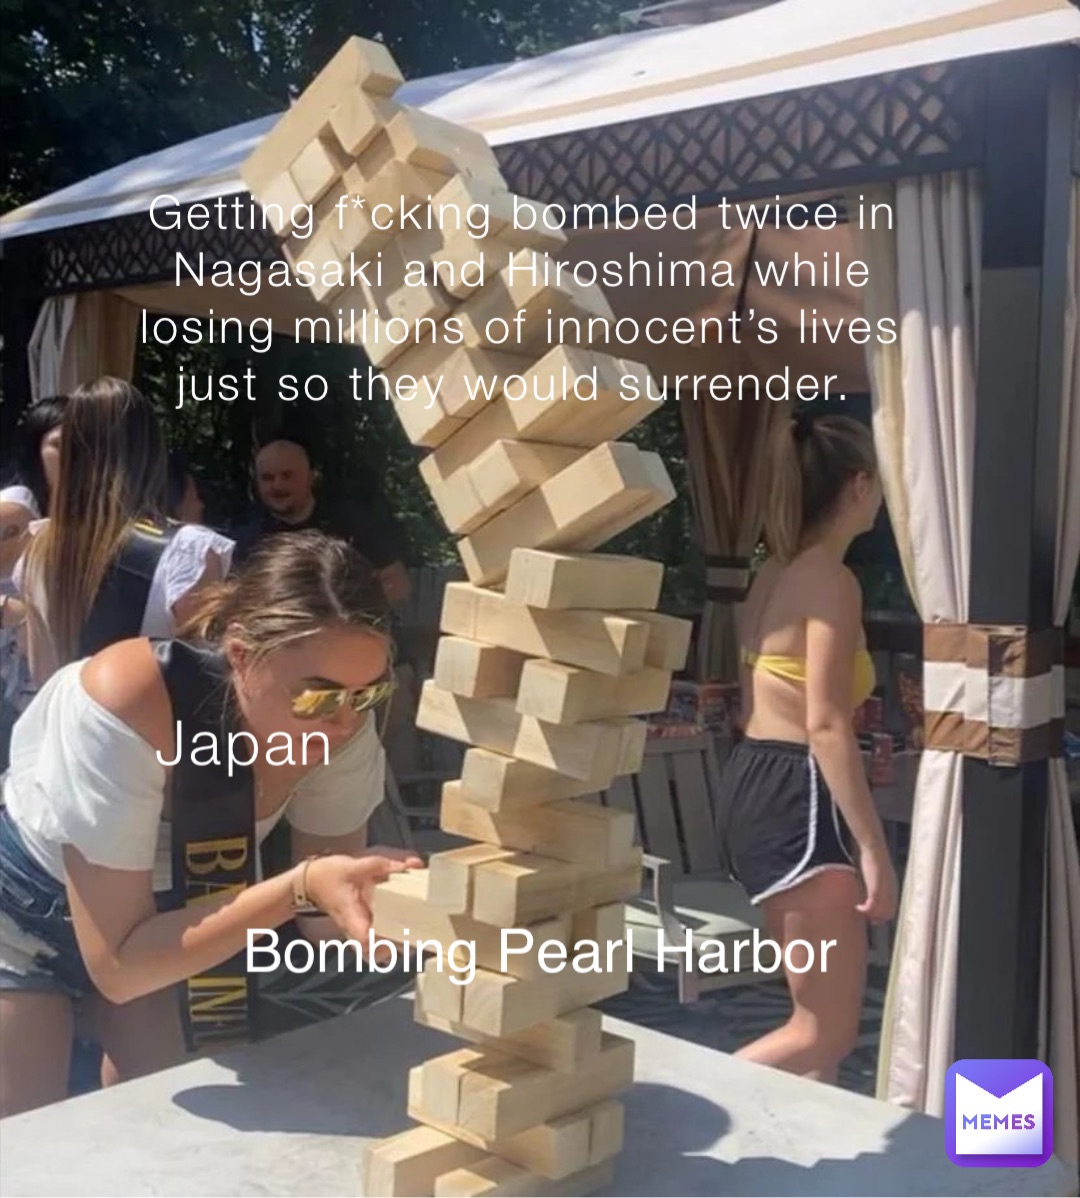 Getting f*cking bombed twice in Nagasaki and Hiroshima while losing millions of innocent’s lives just so they would surrender. Japan Bombing Pearl Harbor